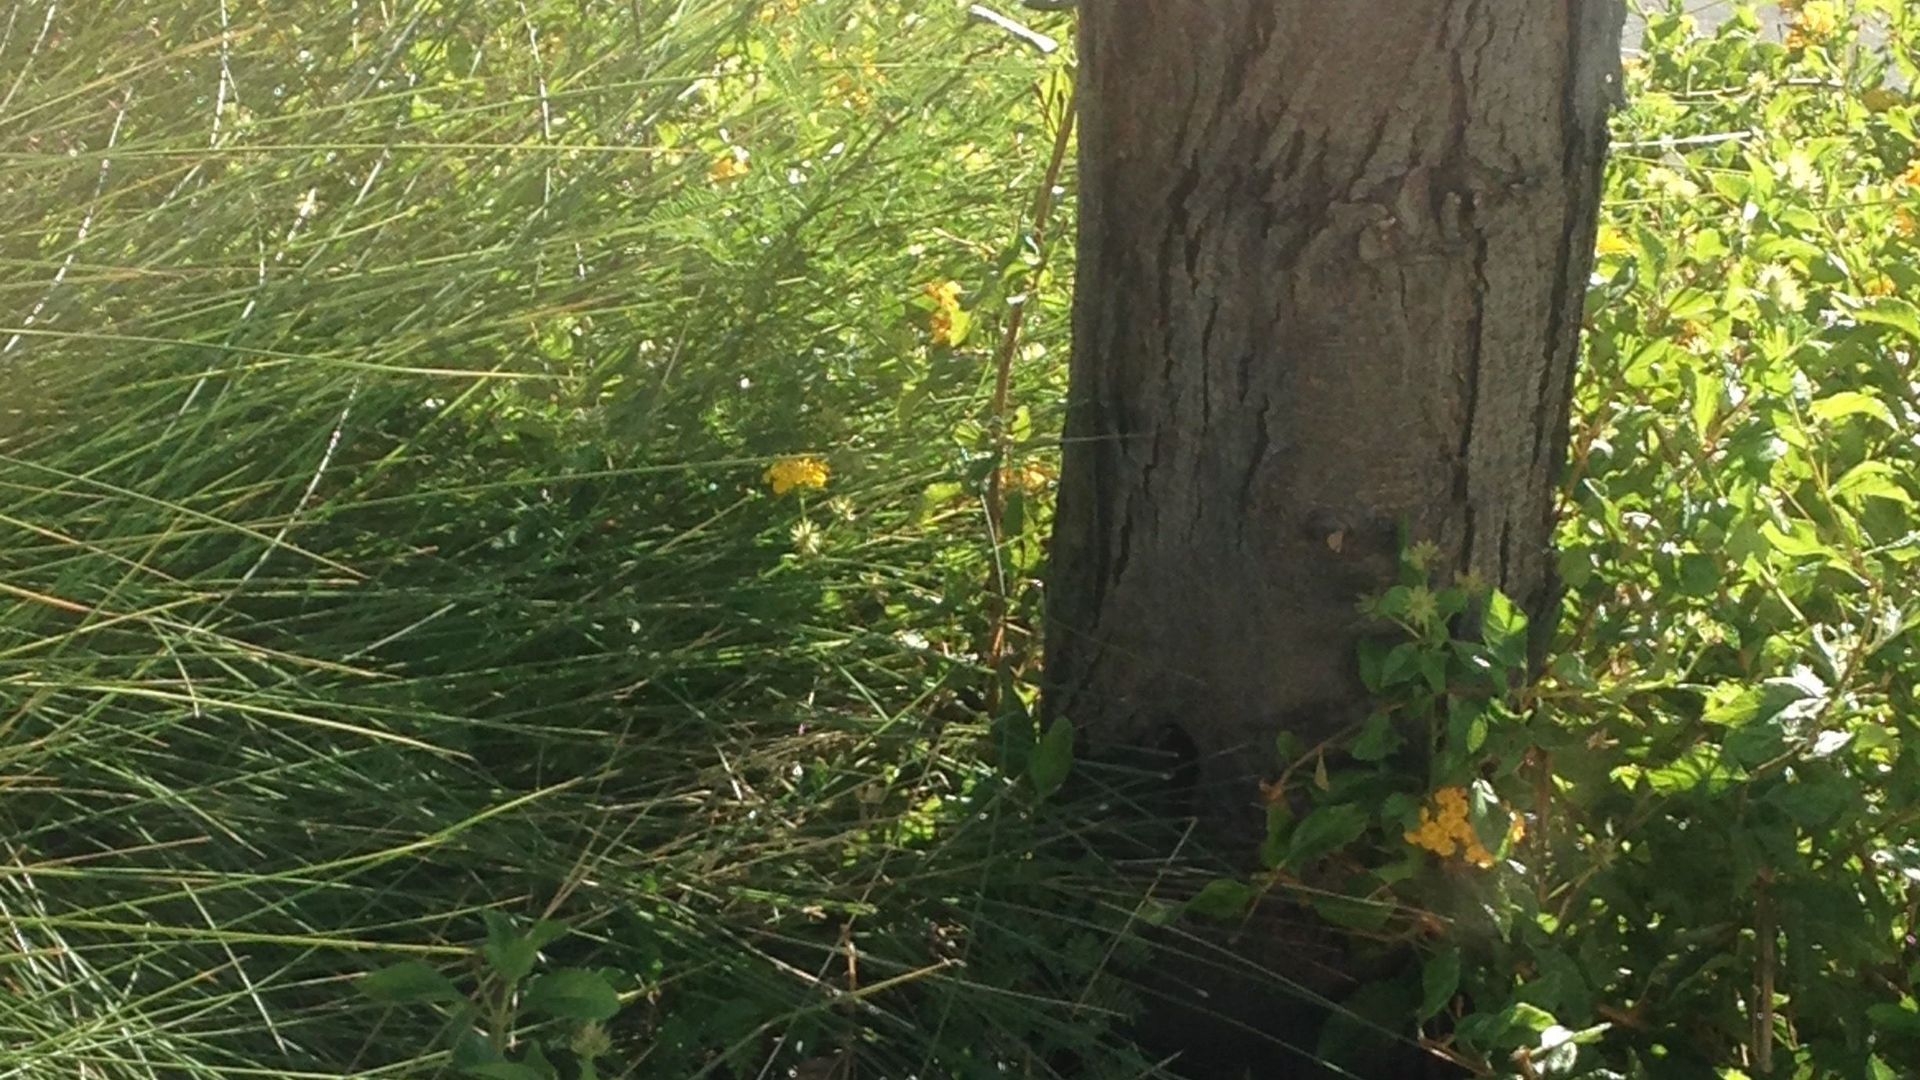 A tree trunk surrounded by grass and flowers. - Cottagecore